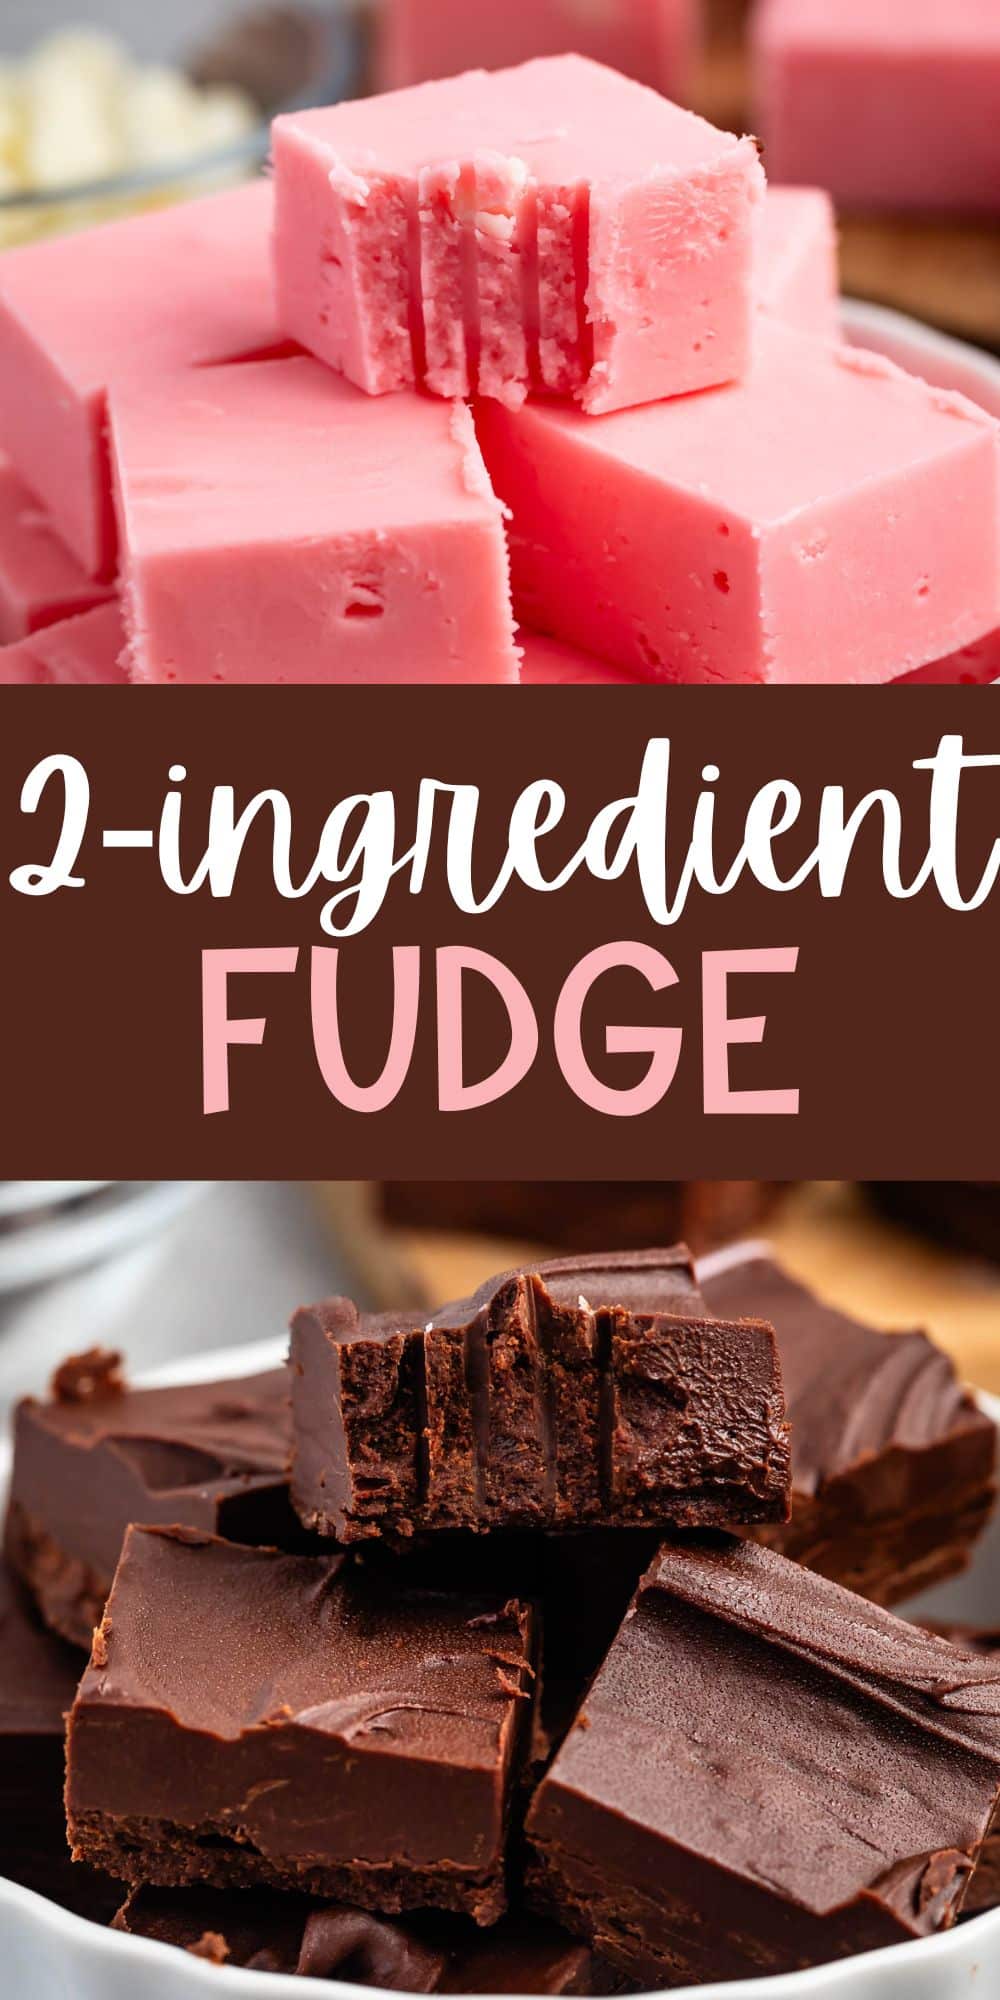 two photos of stacked brown and pink fudge in a white dish with words on the image.